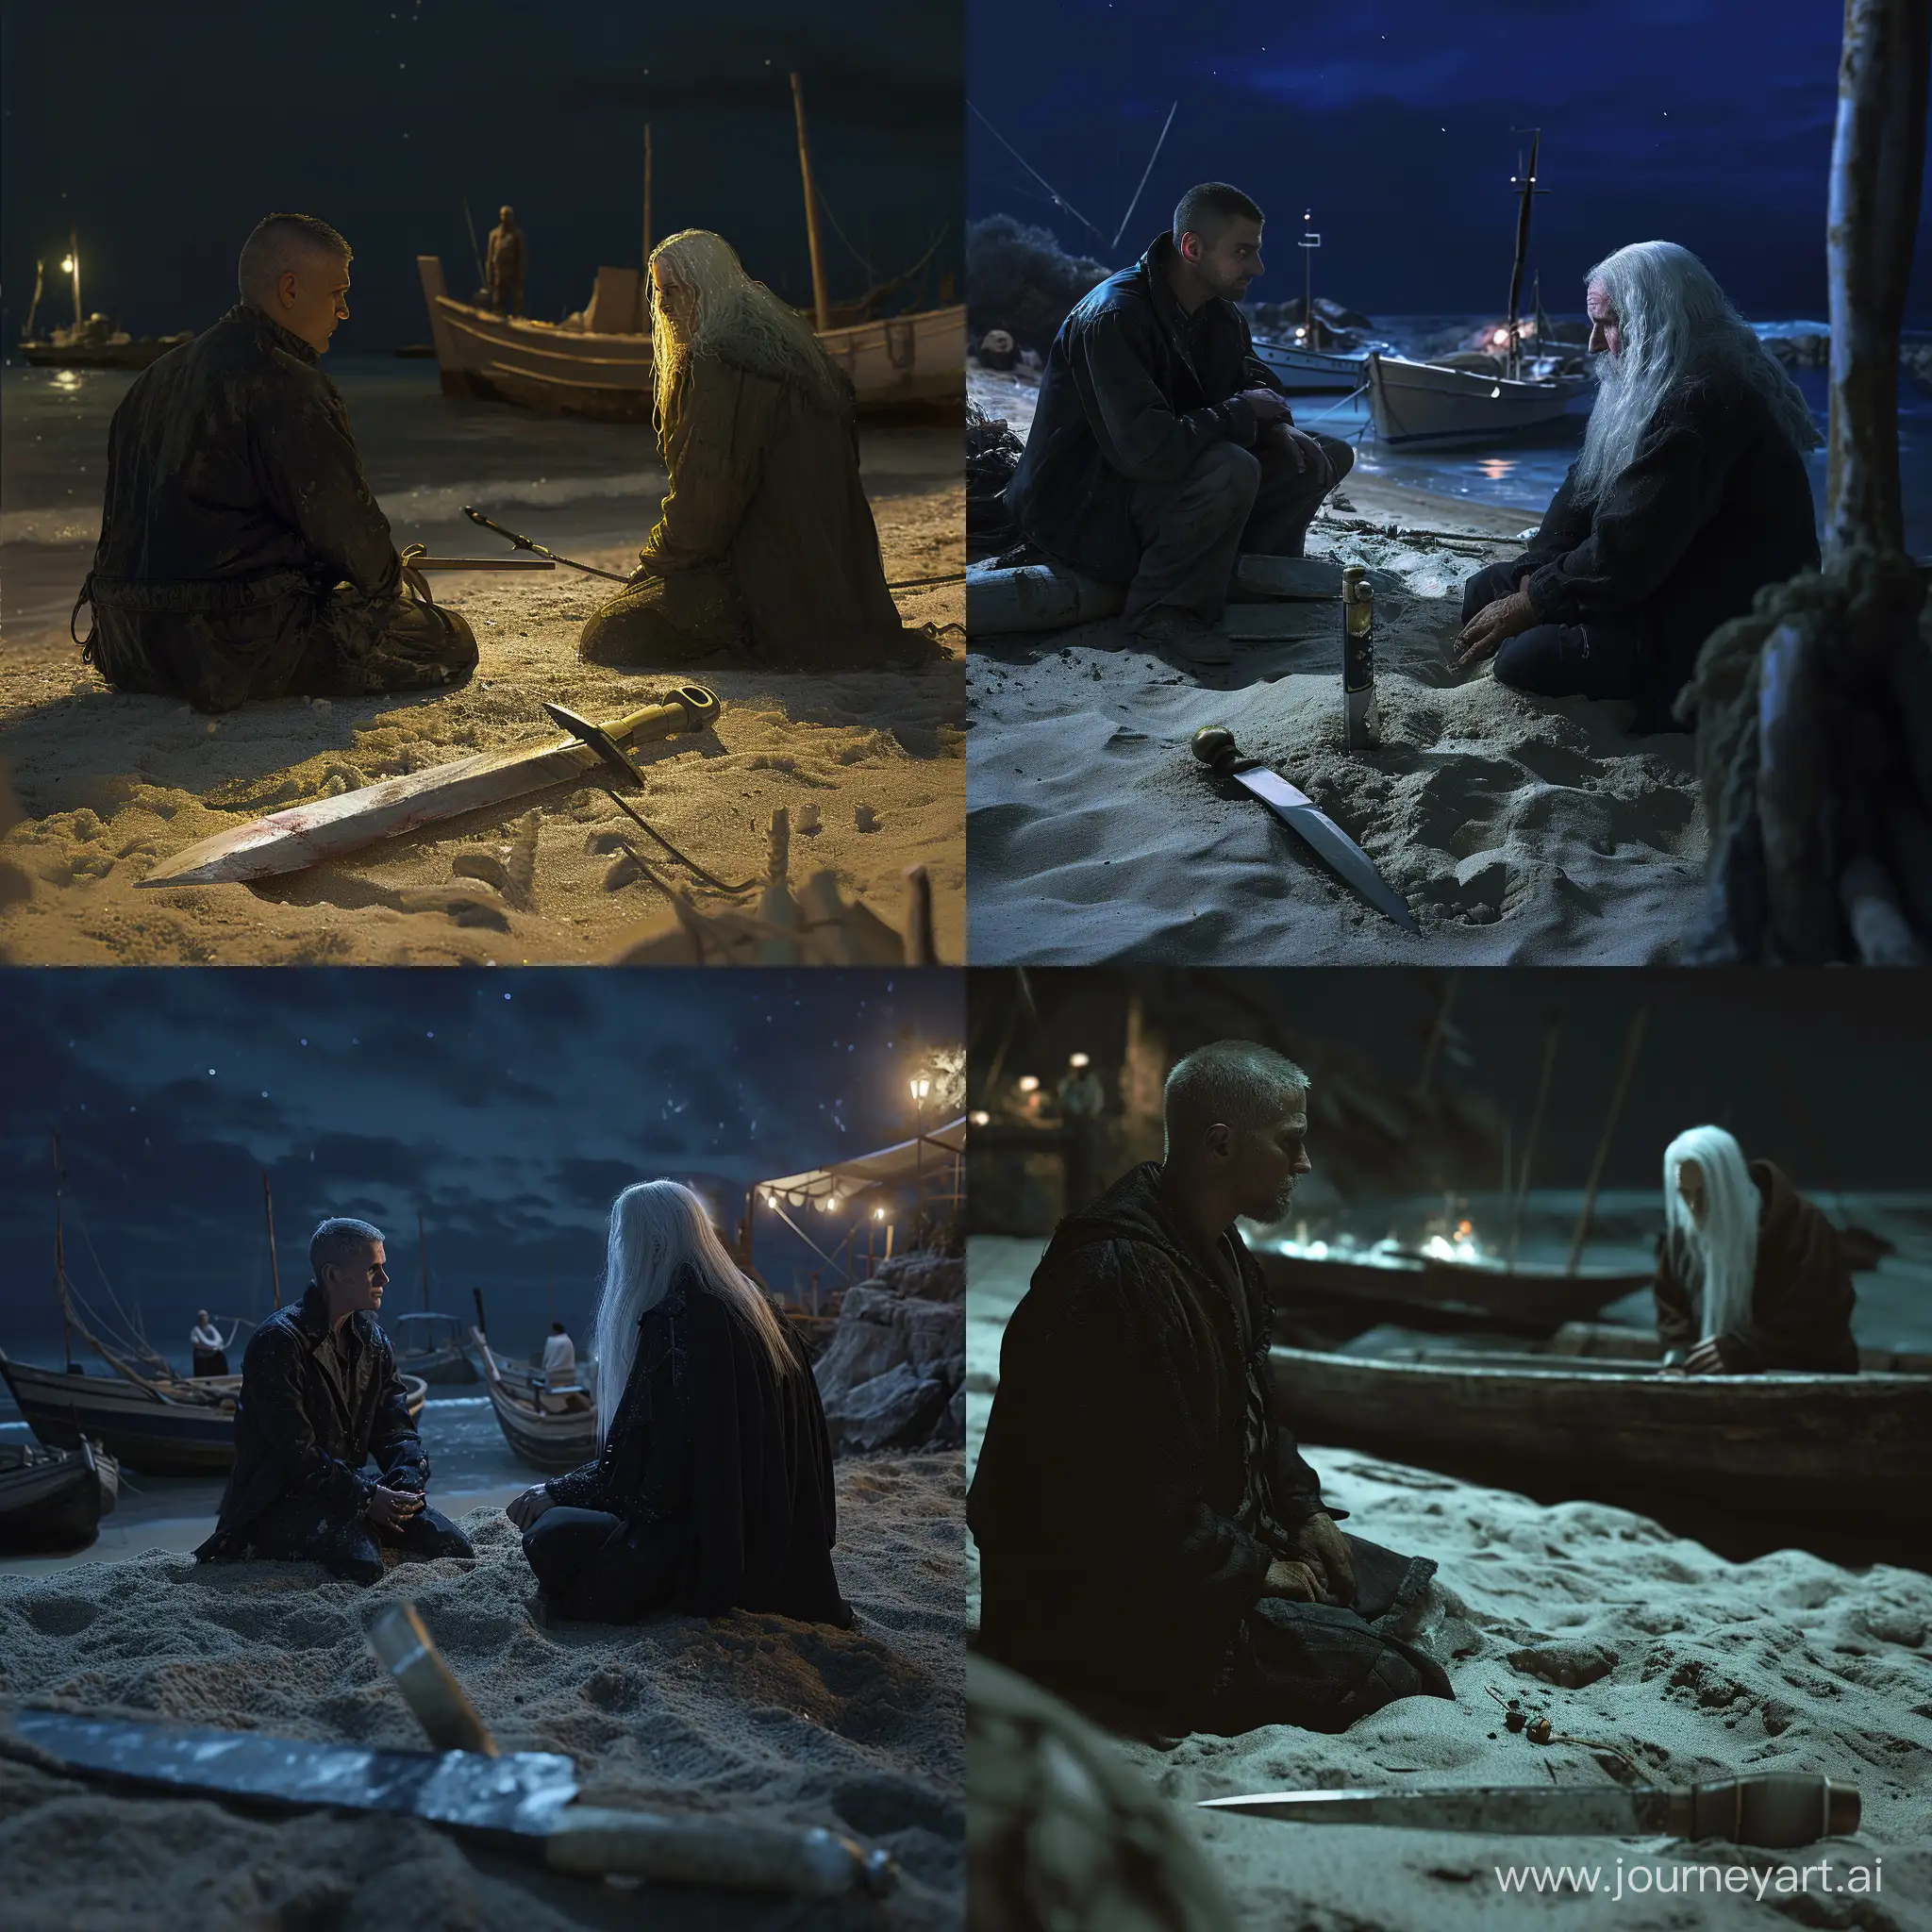 seashore, night, boats on the beach, a man with a short haircut is sitting on a boat, in a dark jacket, next to a man with long white hair is sitting on a boat,In the foreground, an ancient knife is stuck in the sand,  fishtail, hyper-realism, 8K quality